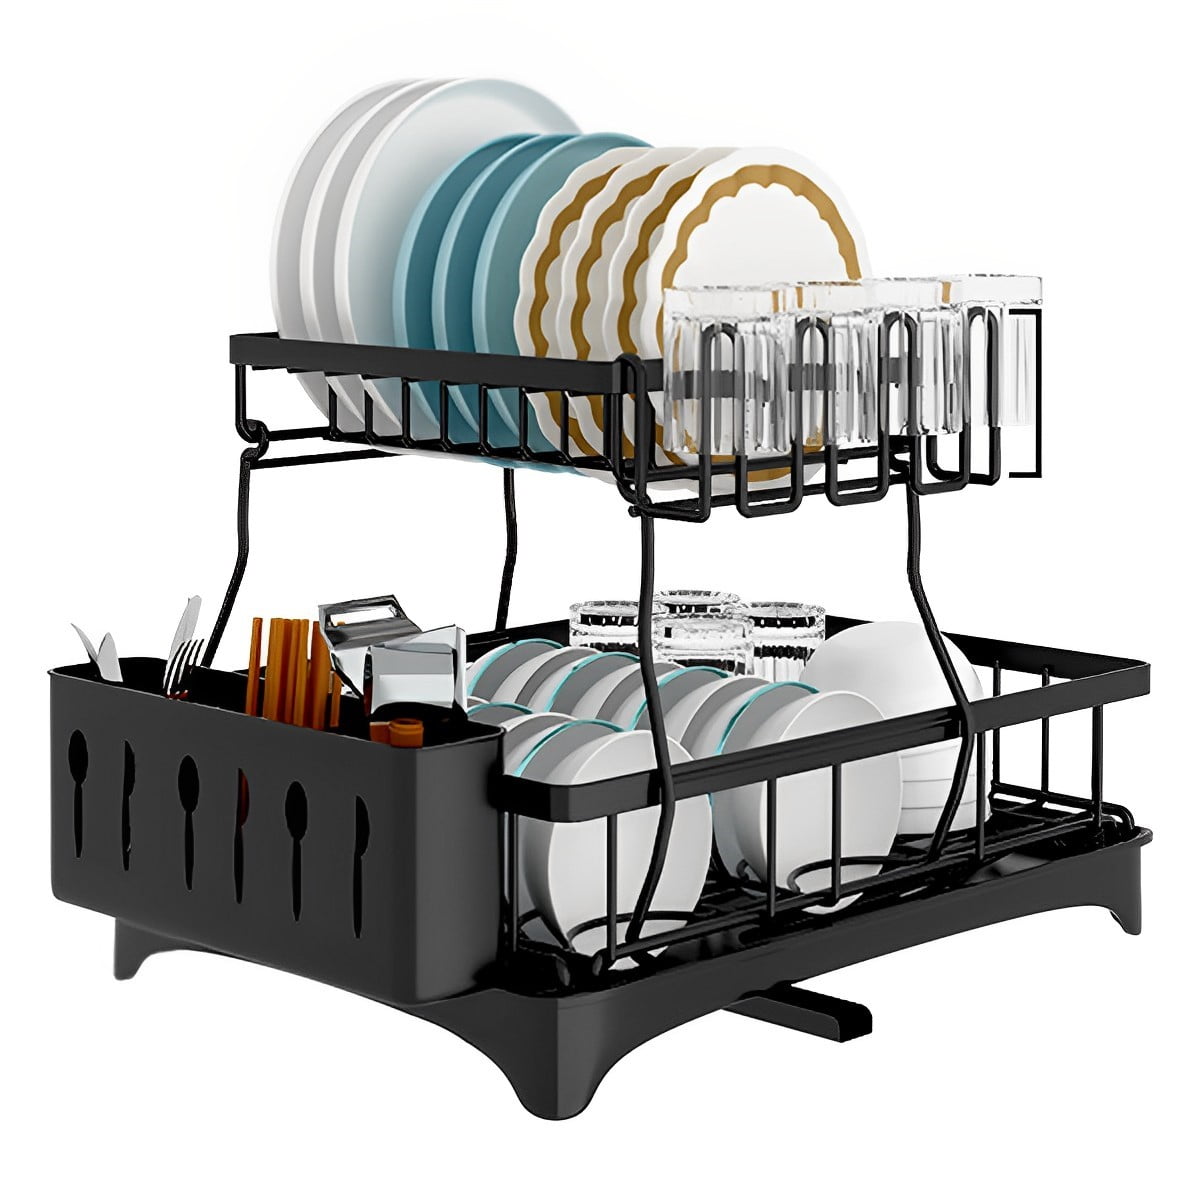 YIYI Guo Dish Drying Rack, Aluminum Rust Proof Dish Rack with Swivel Spout Drying Tray, Removable Cutlery Holder for Kitchen Counter, Black